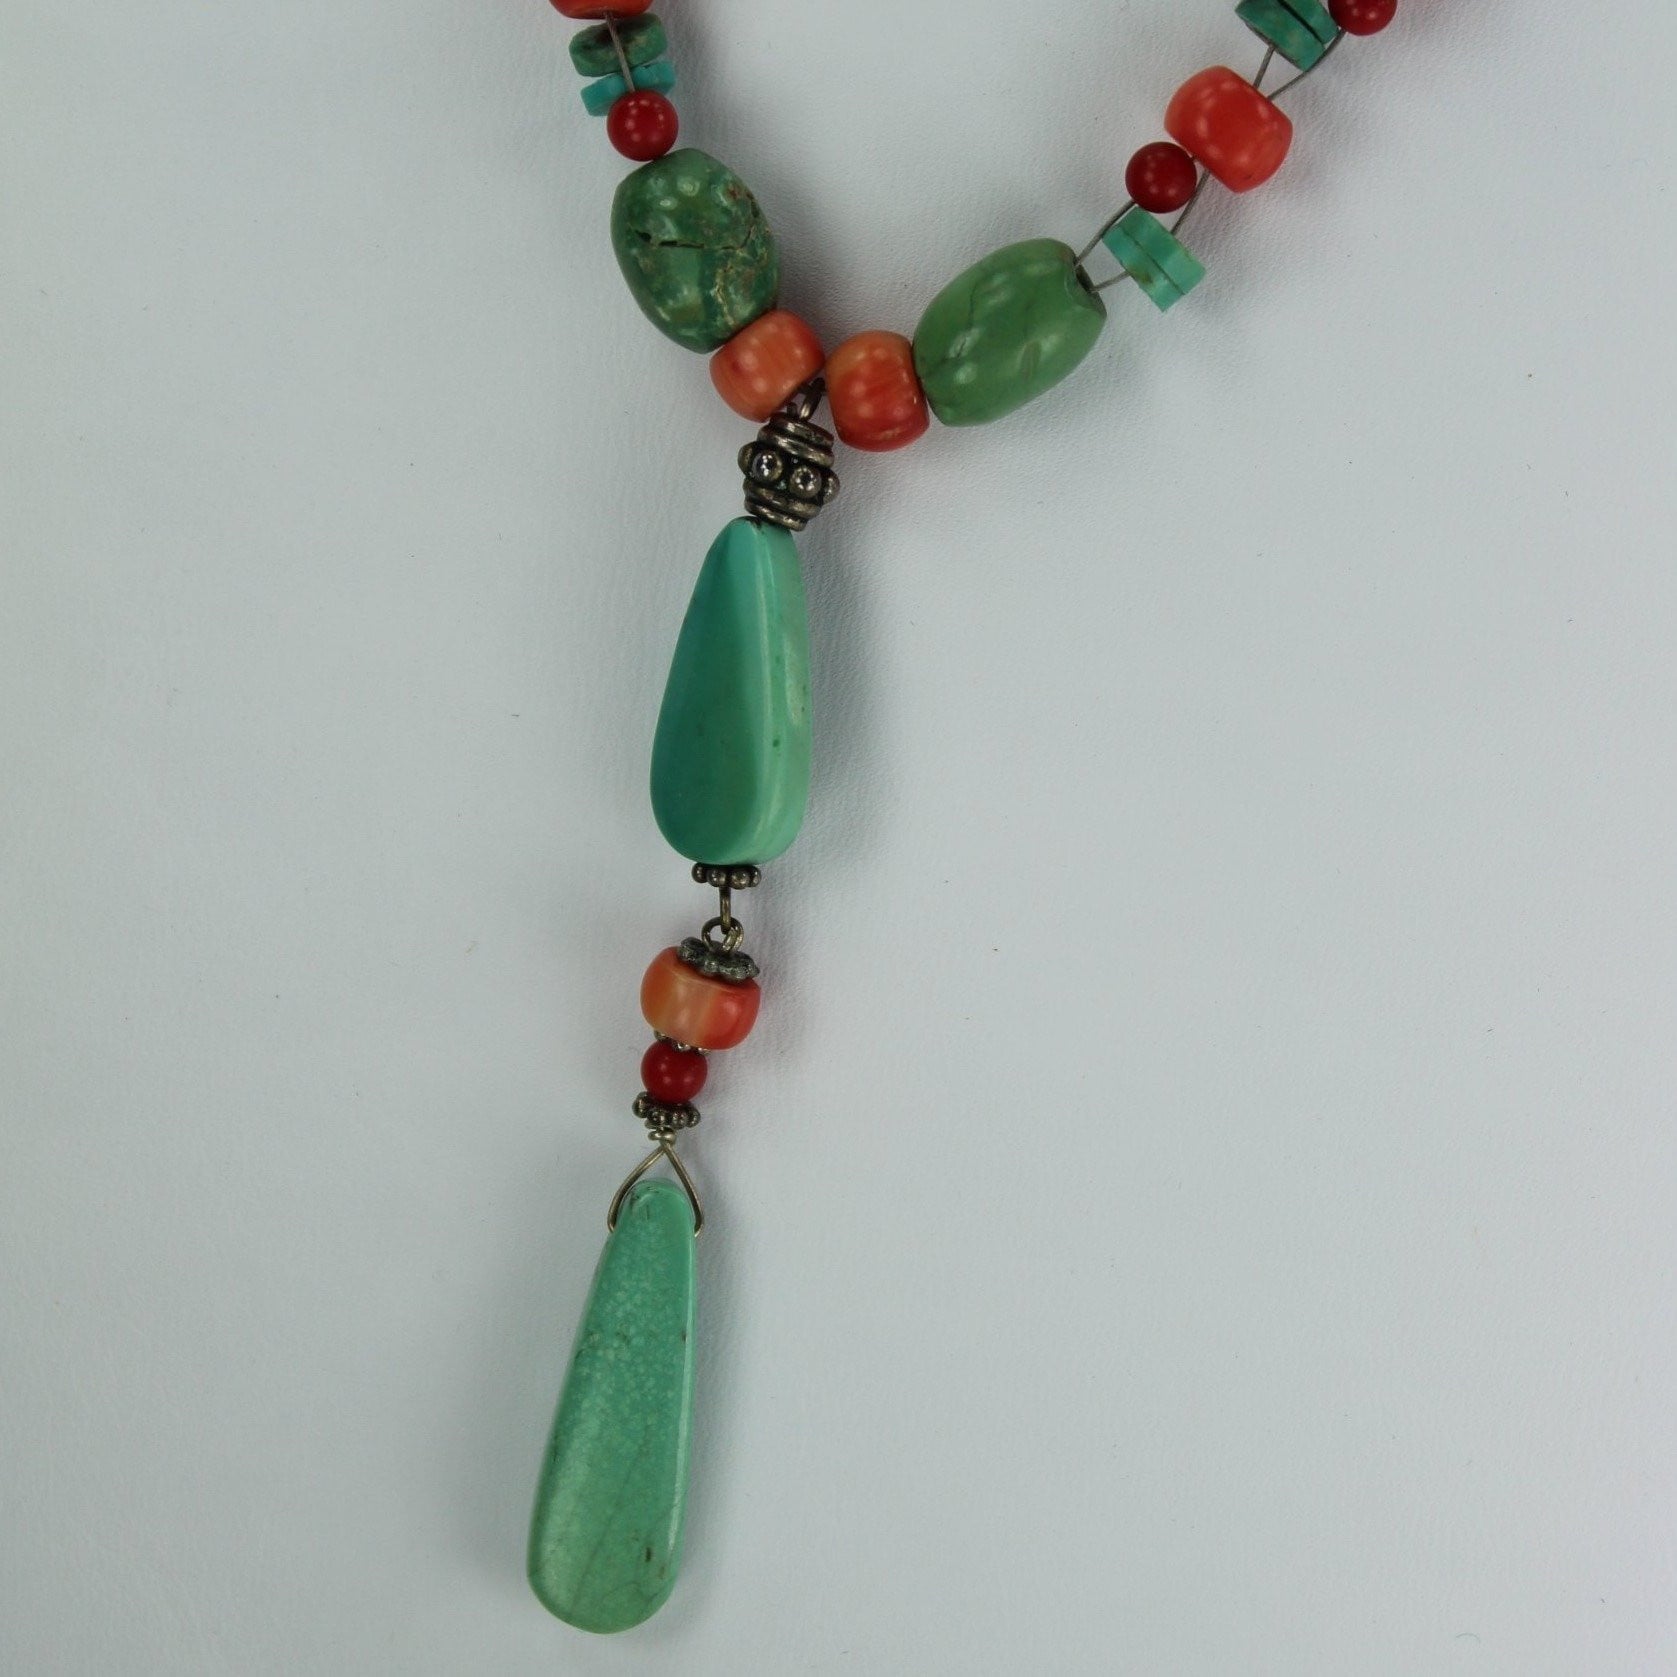 Necklace Turquoise Coral Red Stones Silver Beads Variety Shapes Great Feel Look great colors